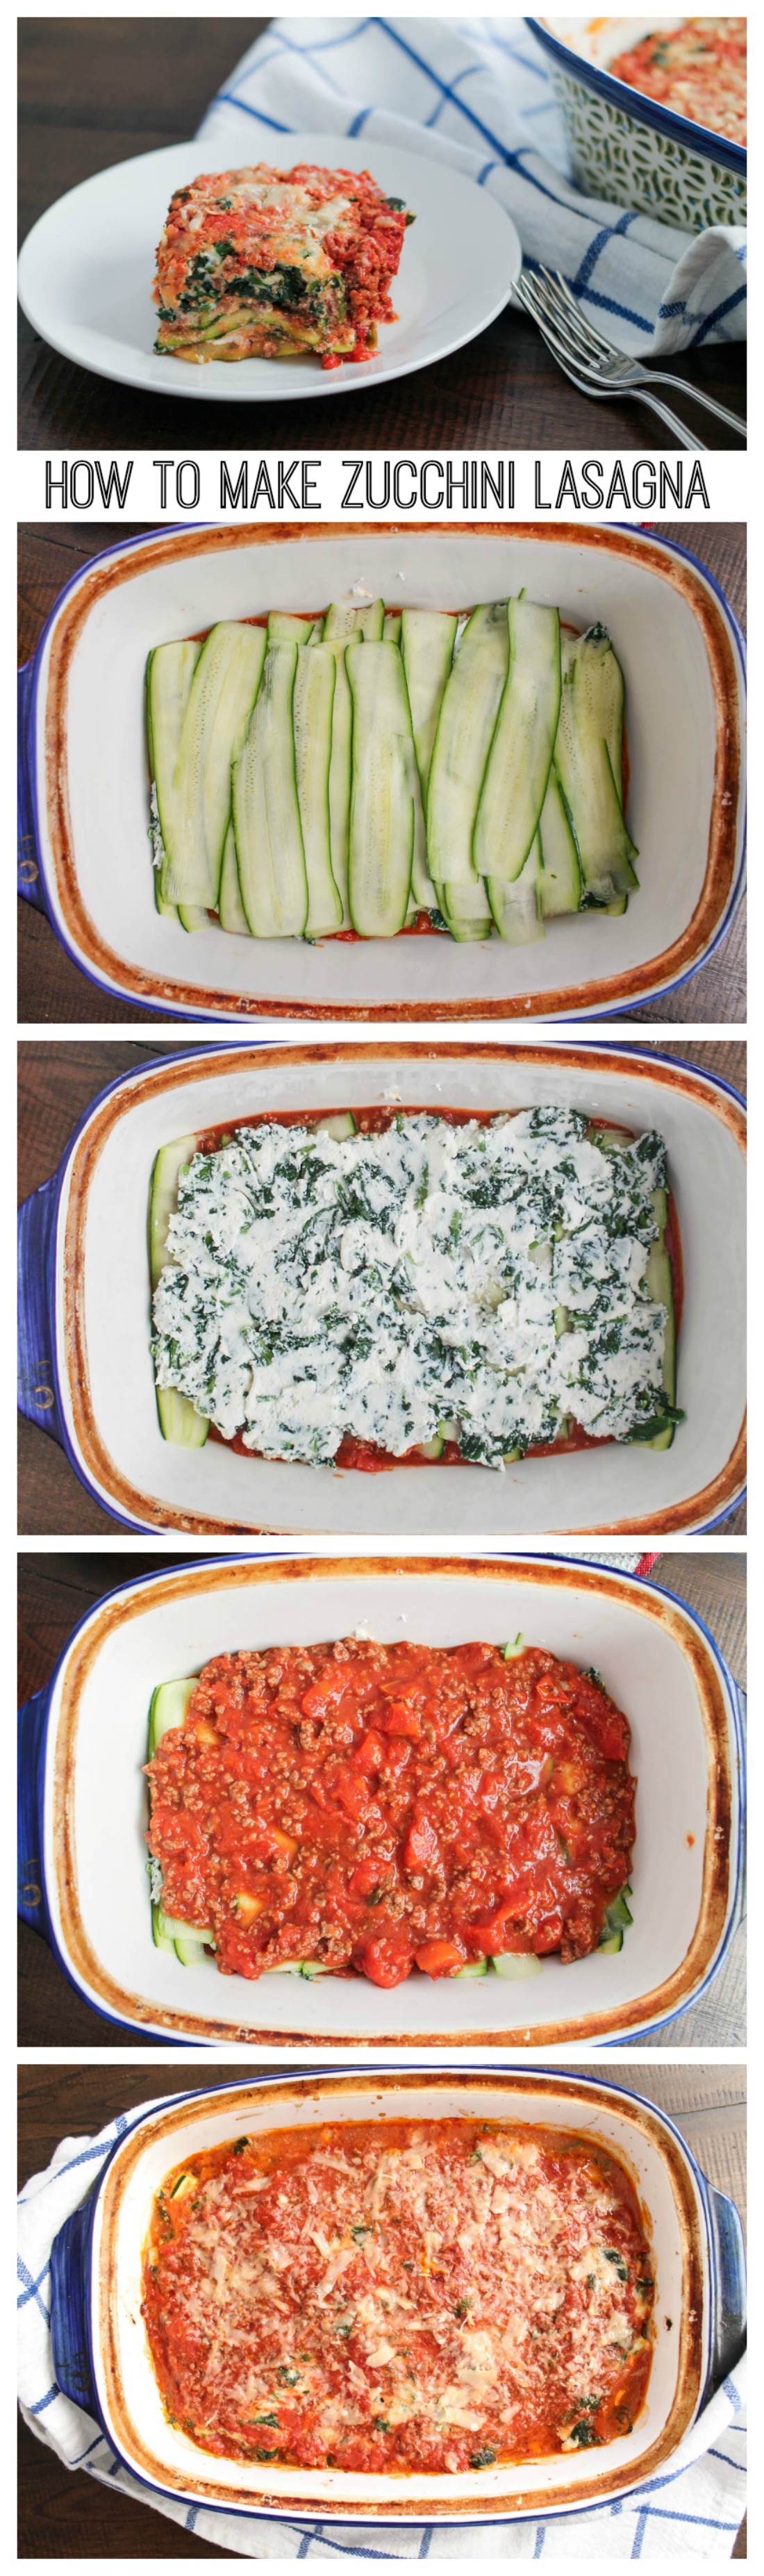 How to Make Zucchini Lasagna - I love this recipe for Zucchini Lasagna because it manages to be meaty while being low-carb.